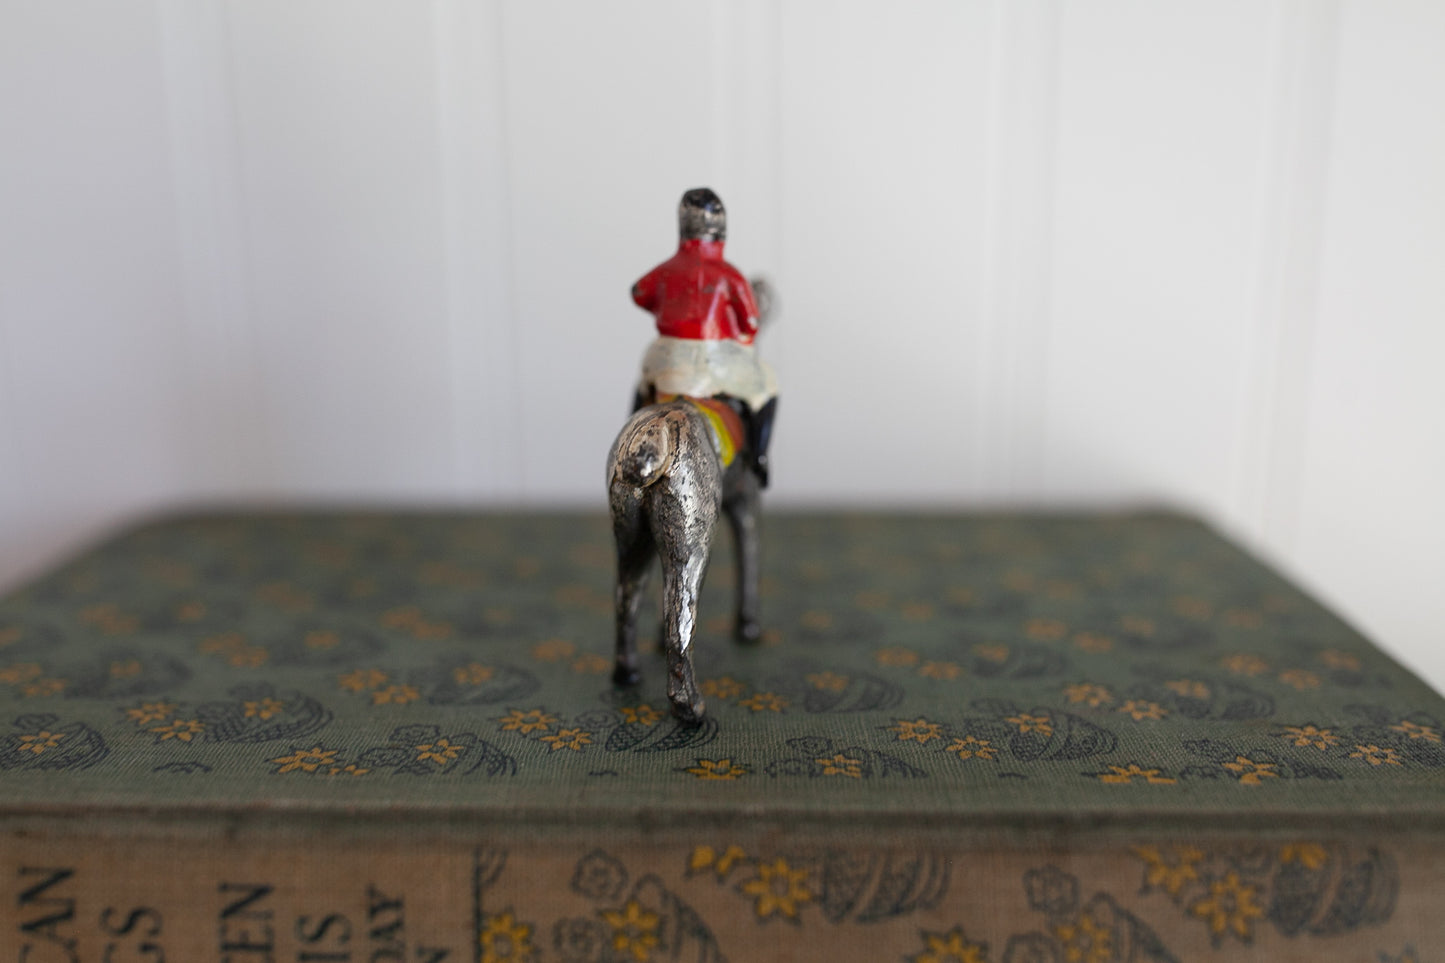 Vintage Japan Cast Iron Lead Silver Painted Horse &Jockey Childs Play Toy Figure - 2.25" tall